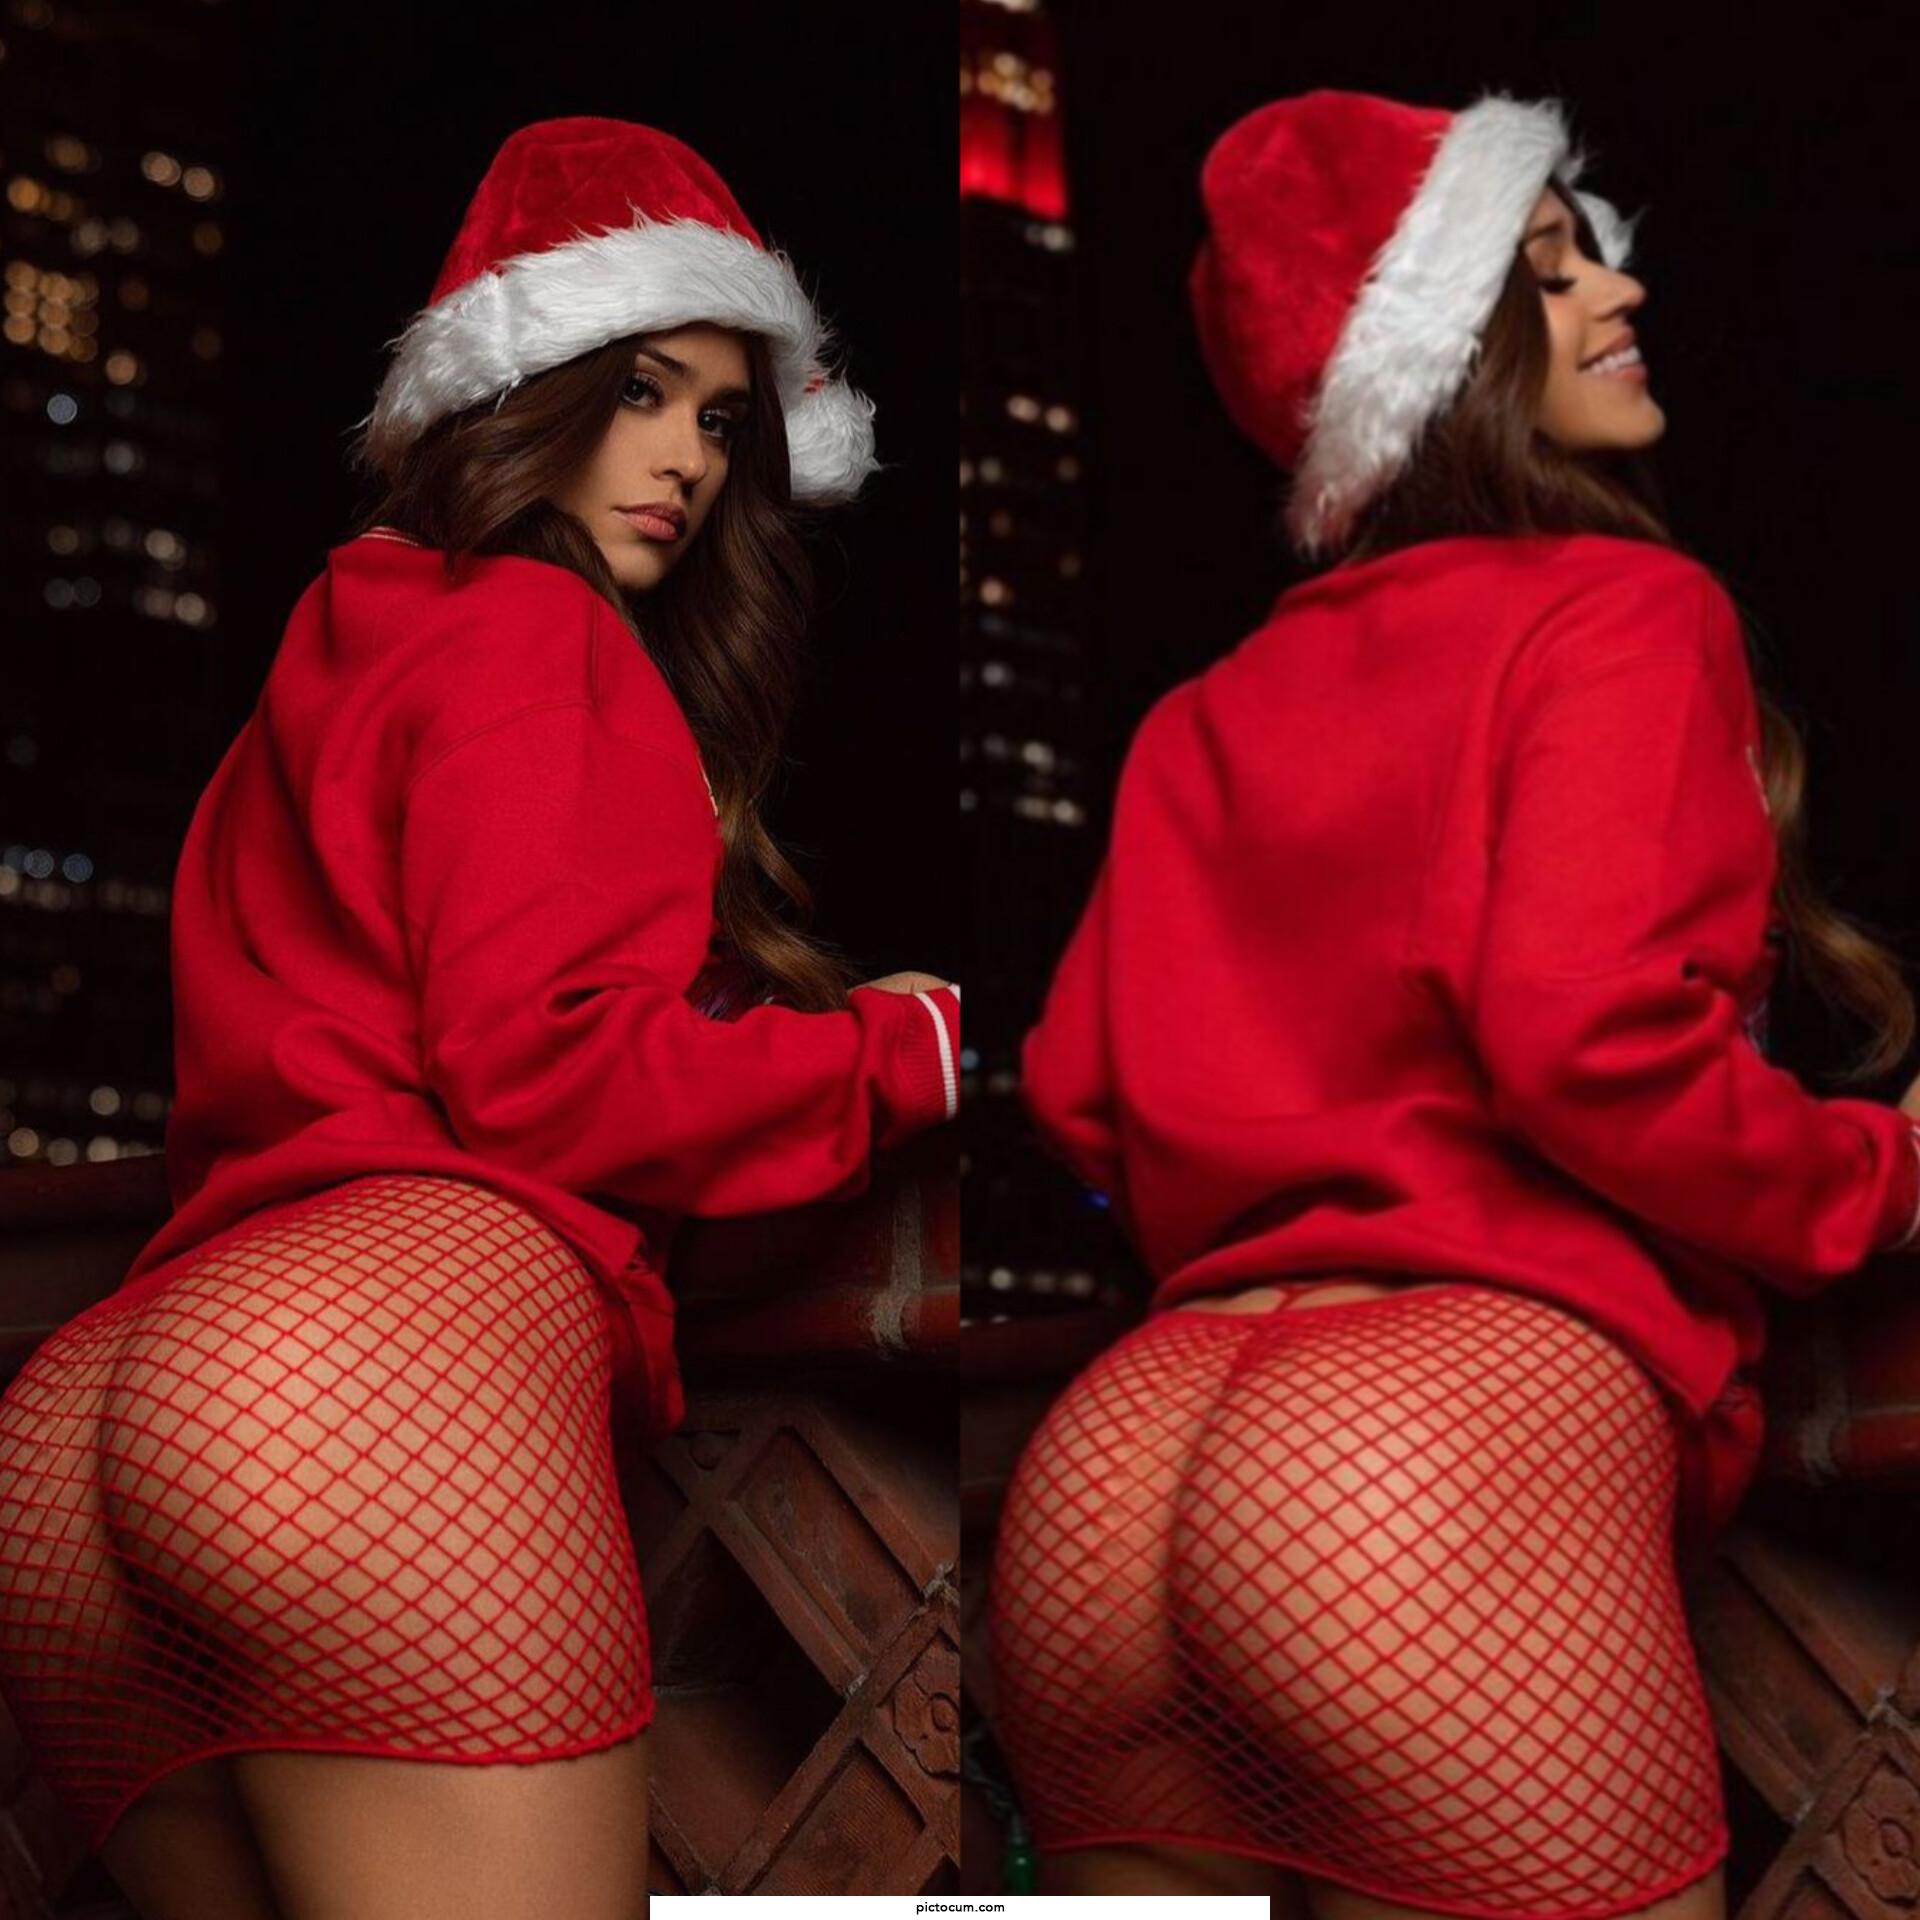 Merry Christmas from Yanet Garcia